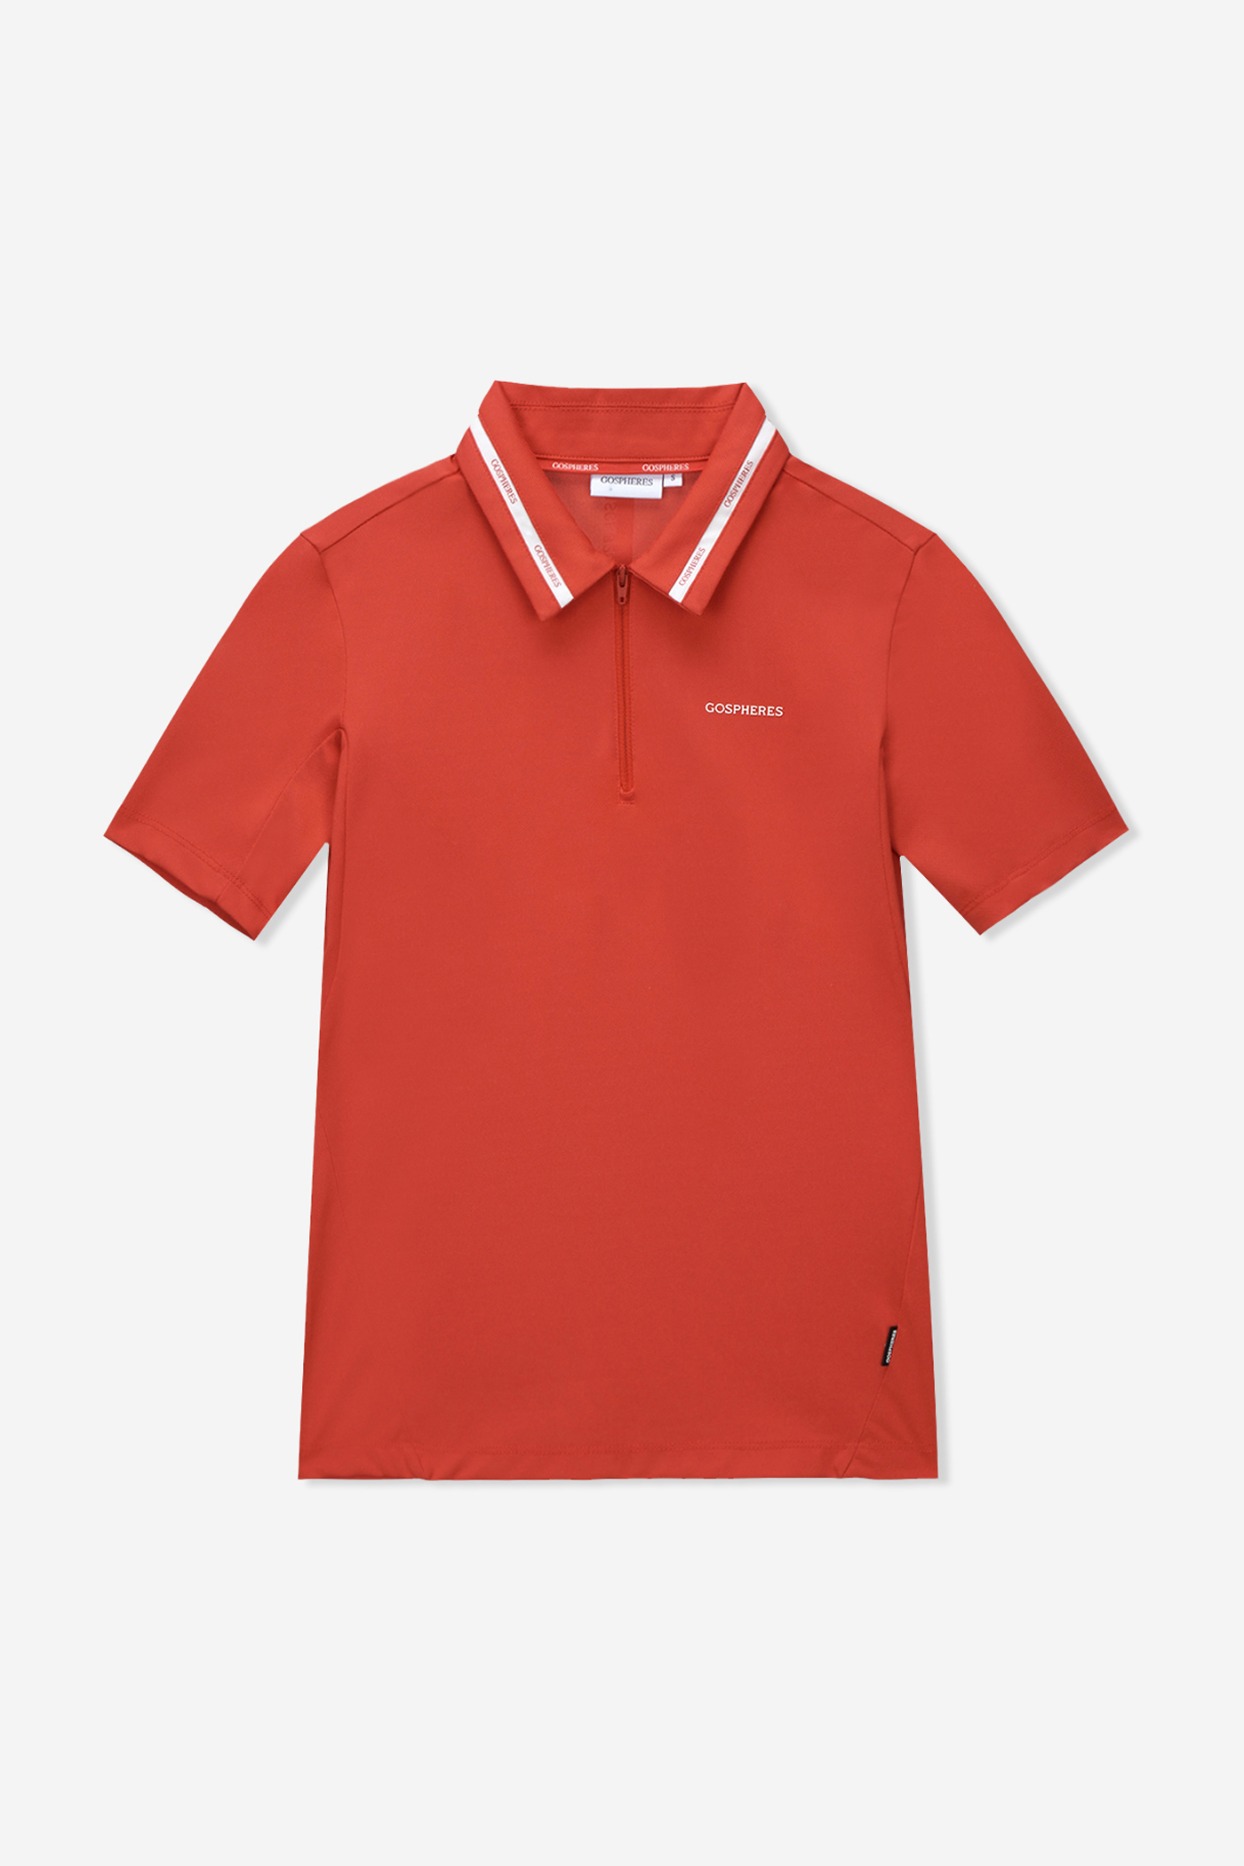 W LOGO TAPE COLLAR POLO T-SHIRT RED